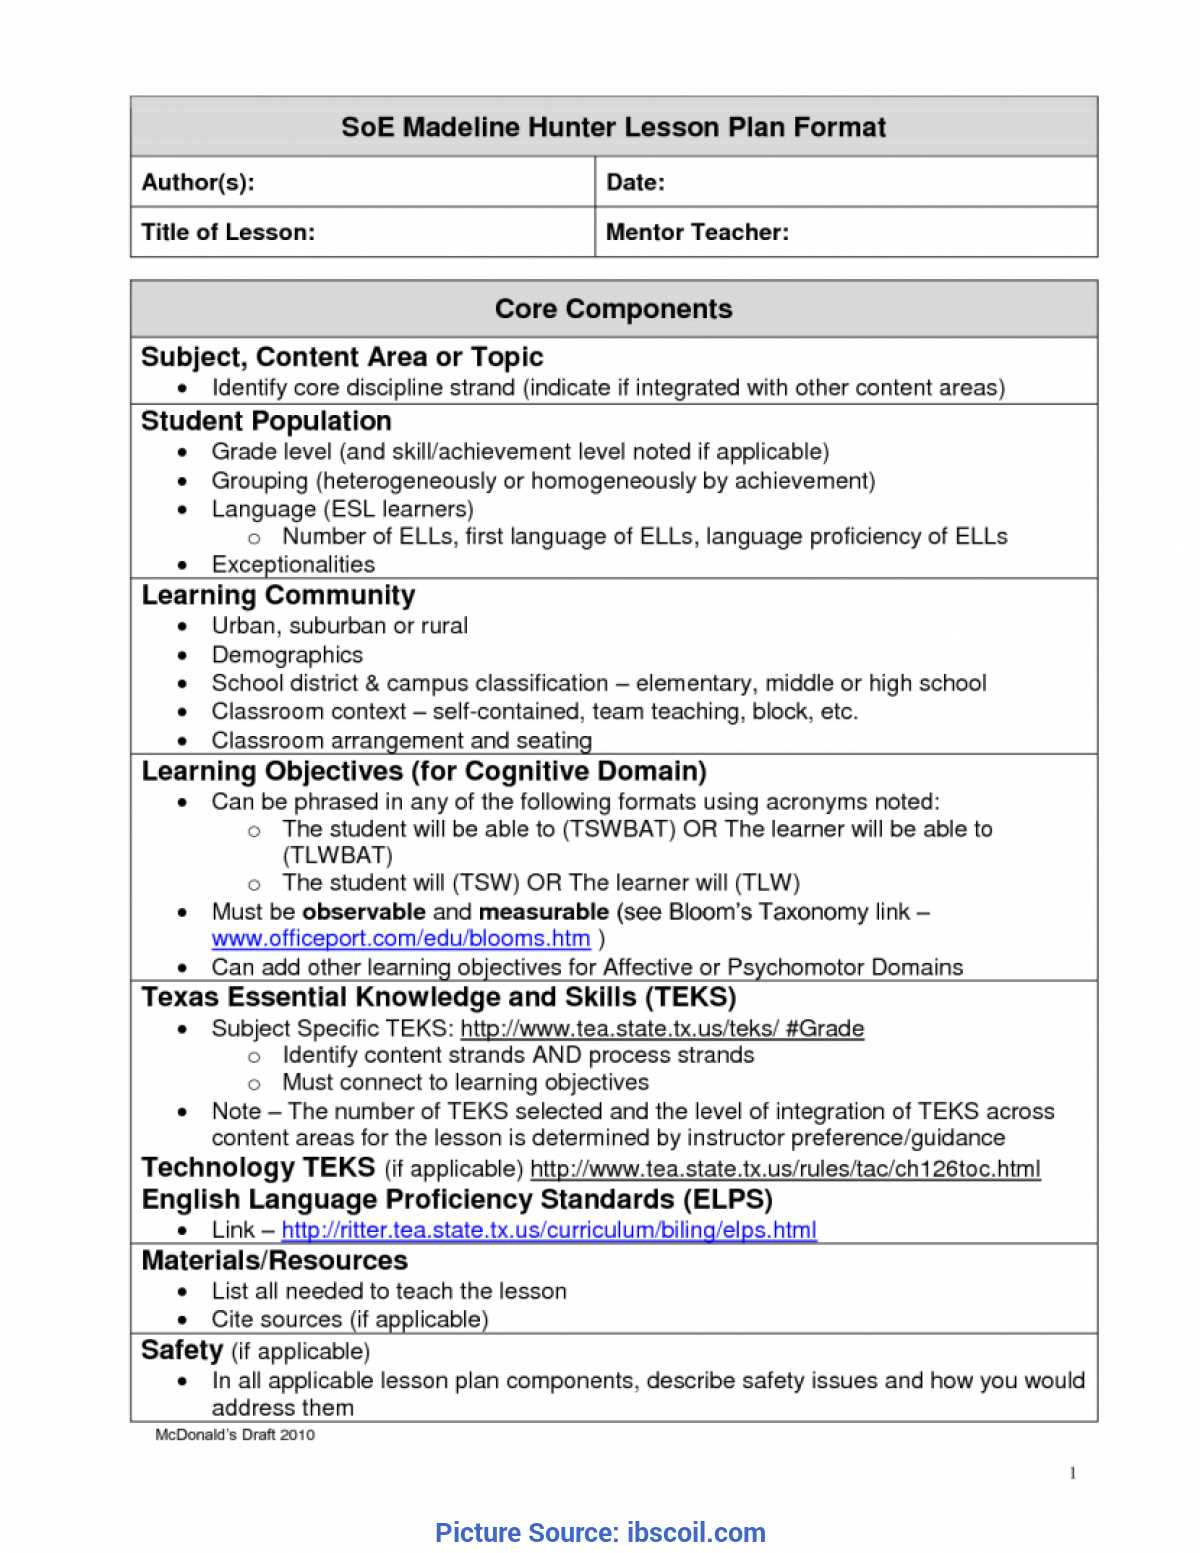 Madeline Hunter Lesson Plan Template Twiroo Com | Lesso For Madeline Hunter Lesson Plan Template Blank